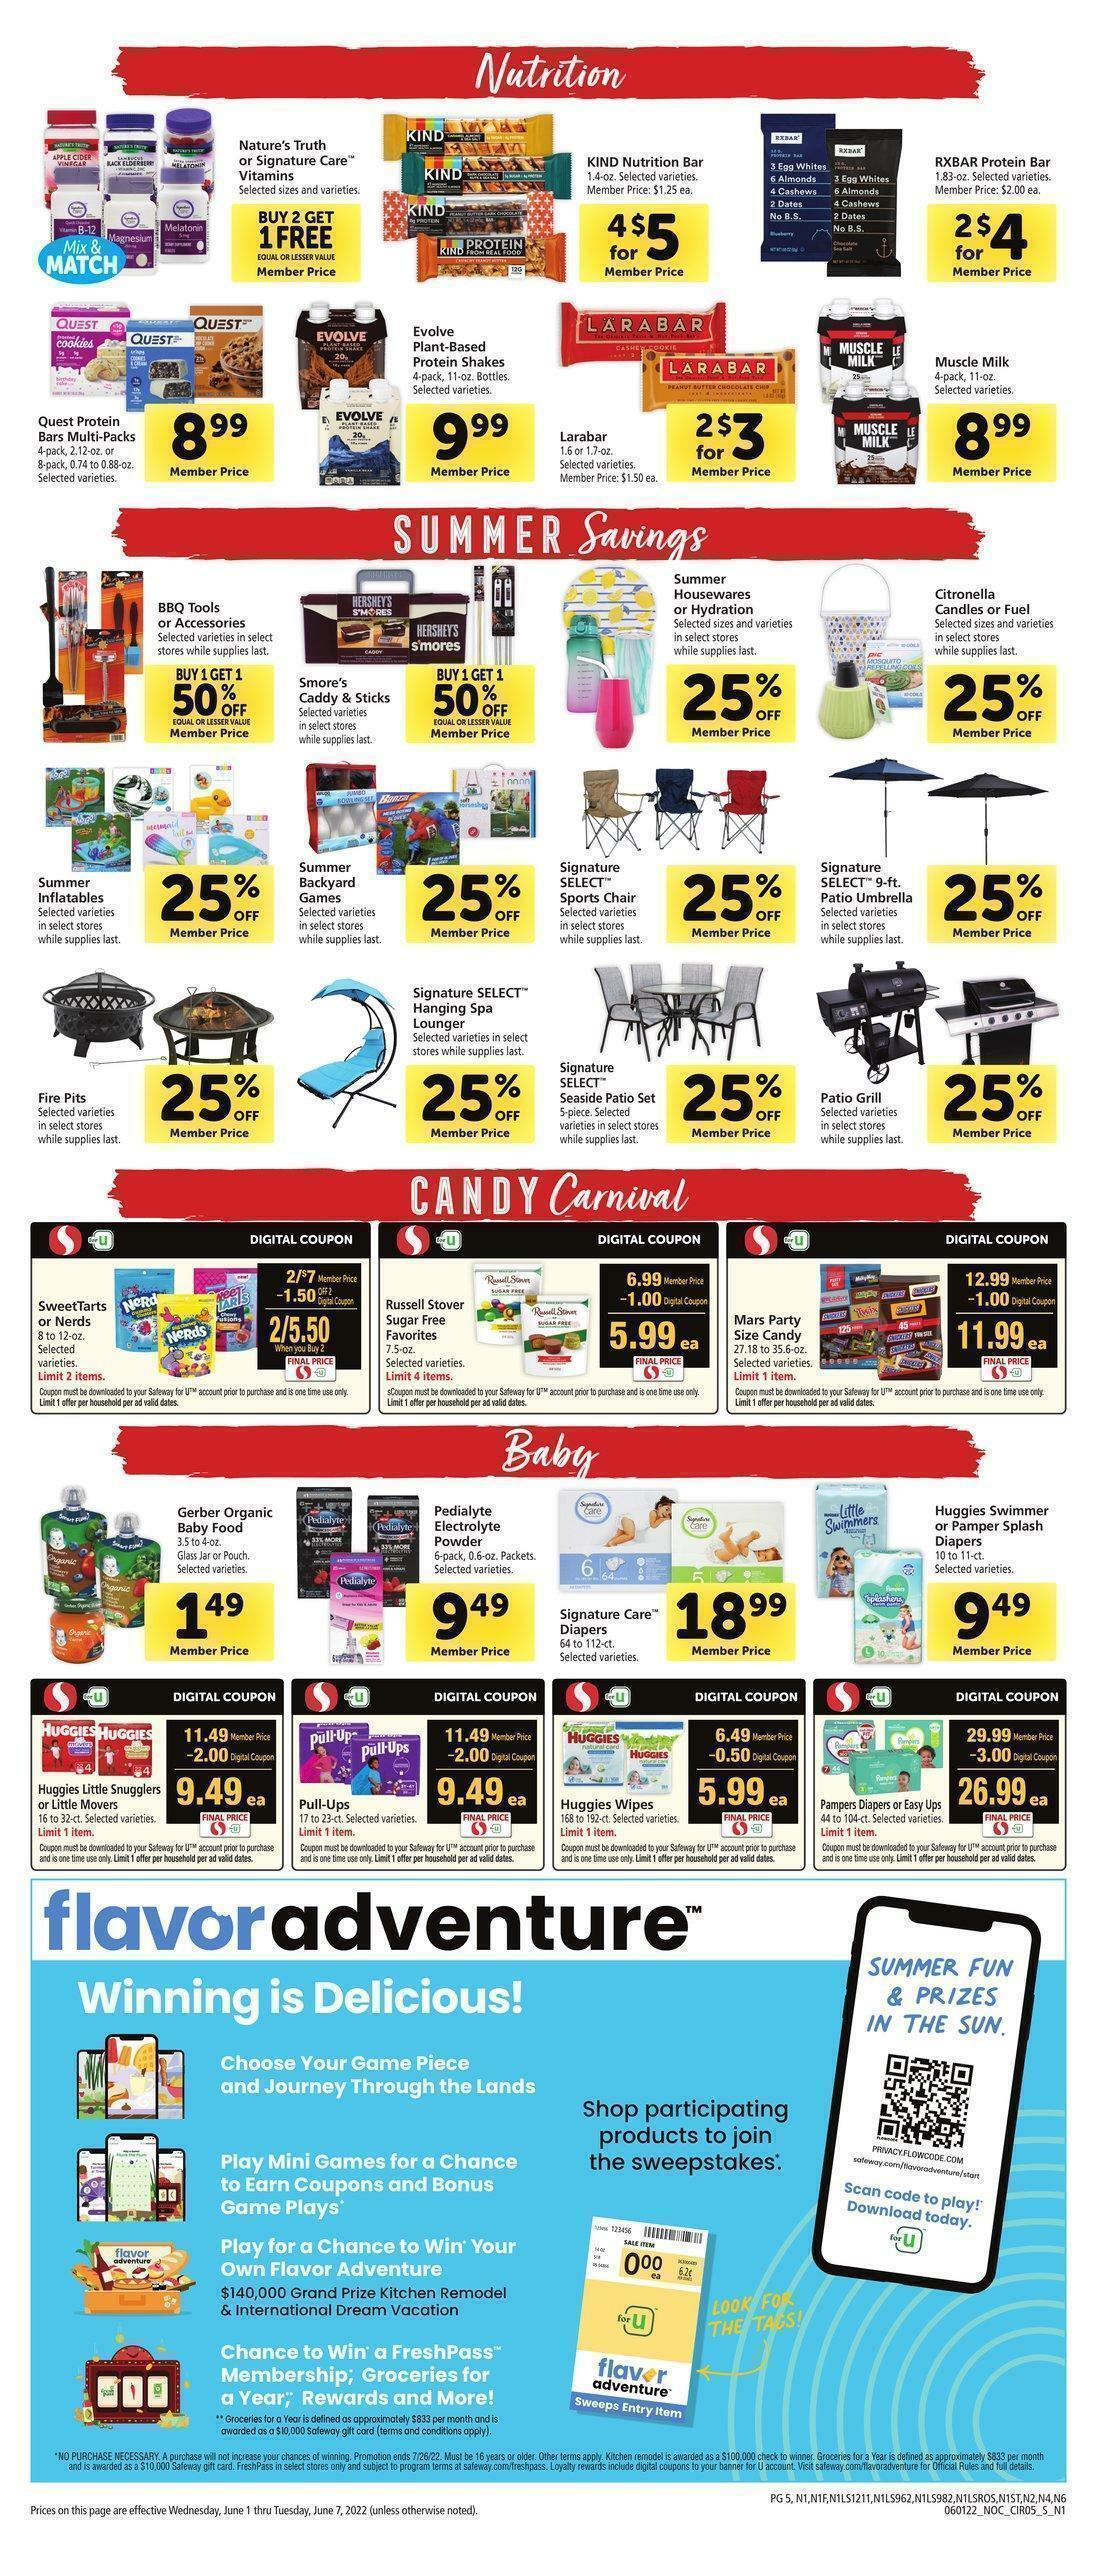 Safeway Weekly Ad from June 1